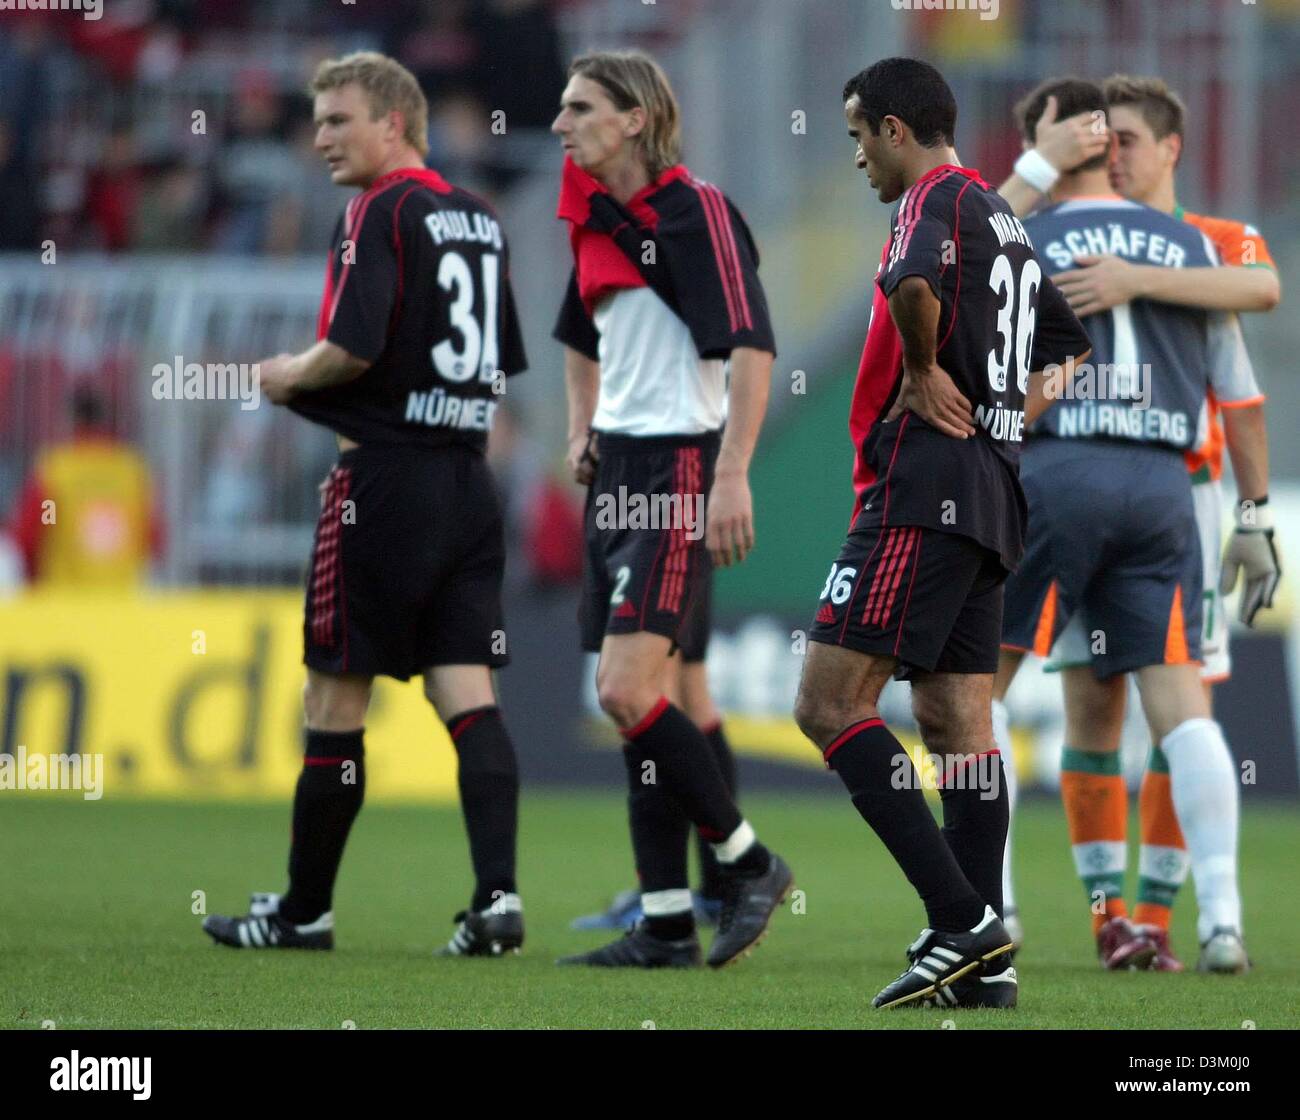 (dpa) - Thoams Paulus, Benjamin Lense and Jaouhar Mnari (L-R, all Nuremberg) walk disappointed over the laen after the Bundesliga match Werder Bremen vs 1.FC Nuremberg in the Weser stadium in Bremen, Germany, Saturday 15 October 2005. Nuremberg lost the match 6-2. Photo: Carmen Jaspersen (Attention: New blocking period! The DFL has prohibited the publication and further utilisation Stock Photo